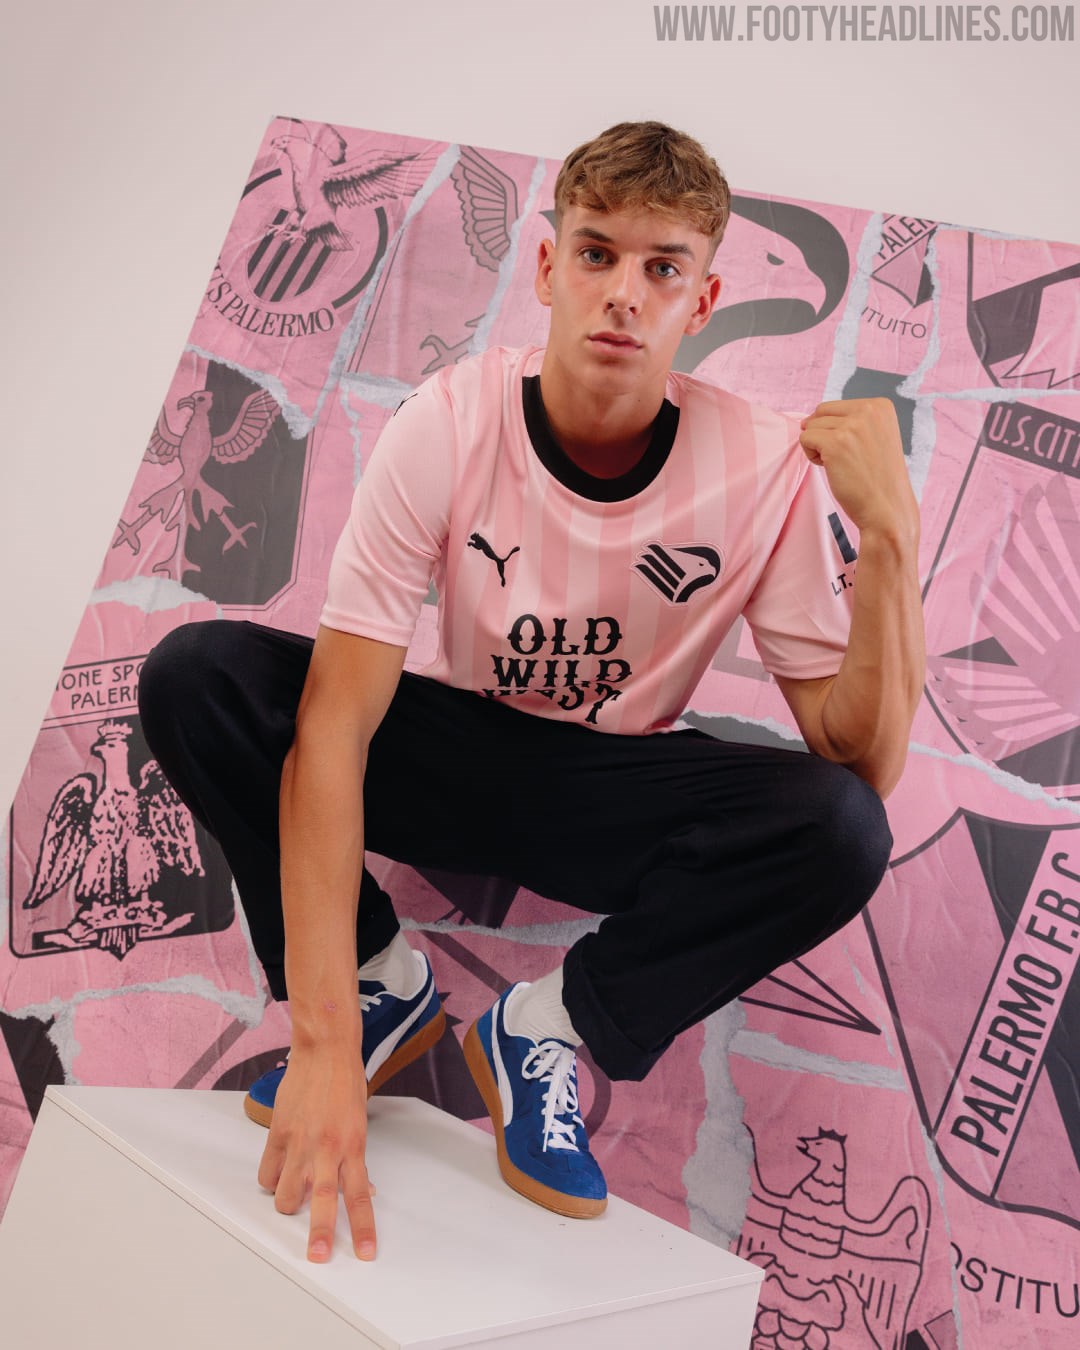 Sicilian Football on X: Palermo debuted their new third kit in yesterday's  Serie C Coppa Italia. What do you think about this jersey? (📸: Palermo FC)   / X